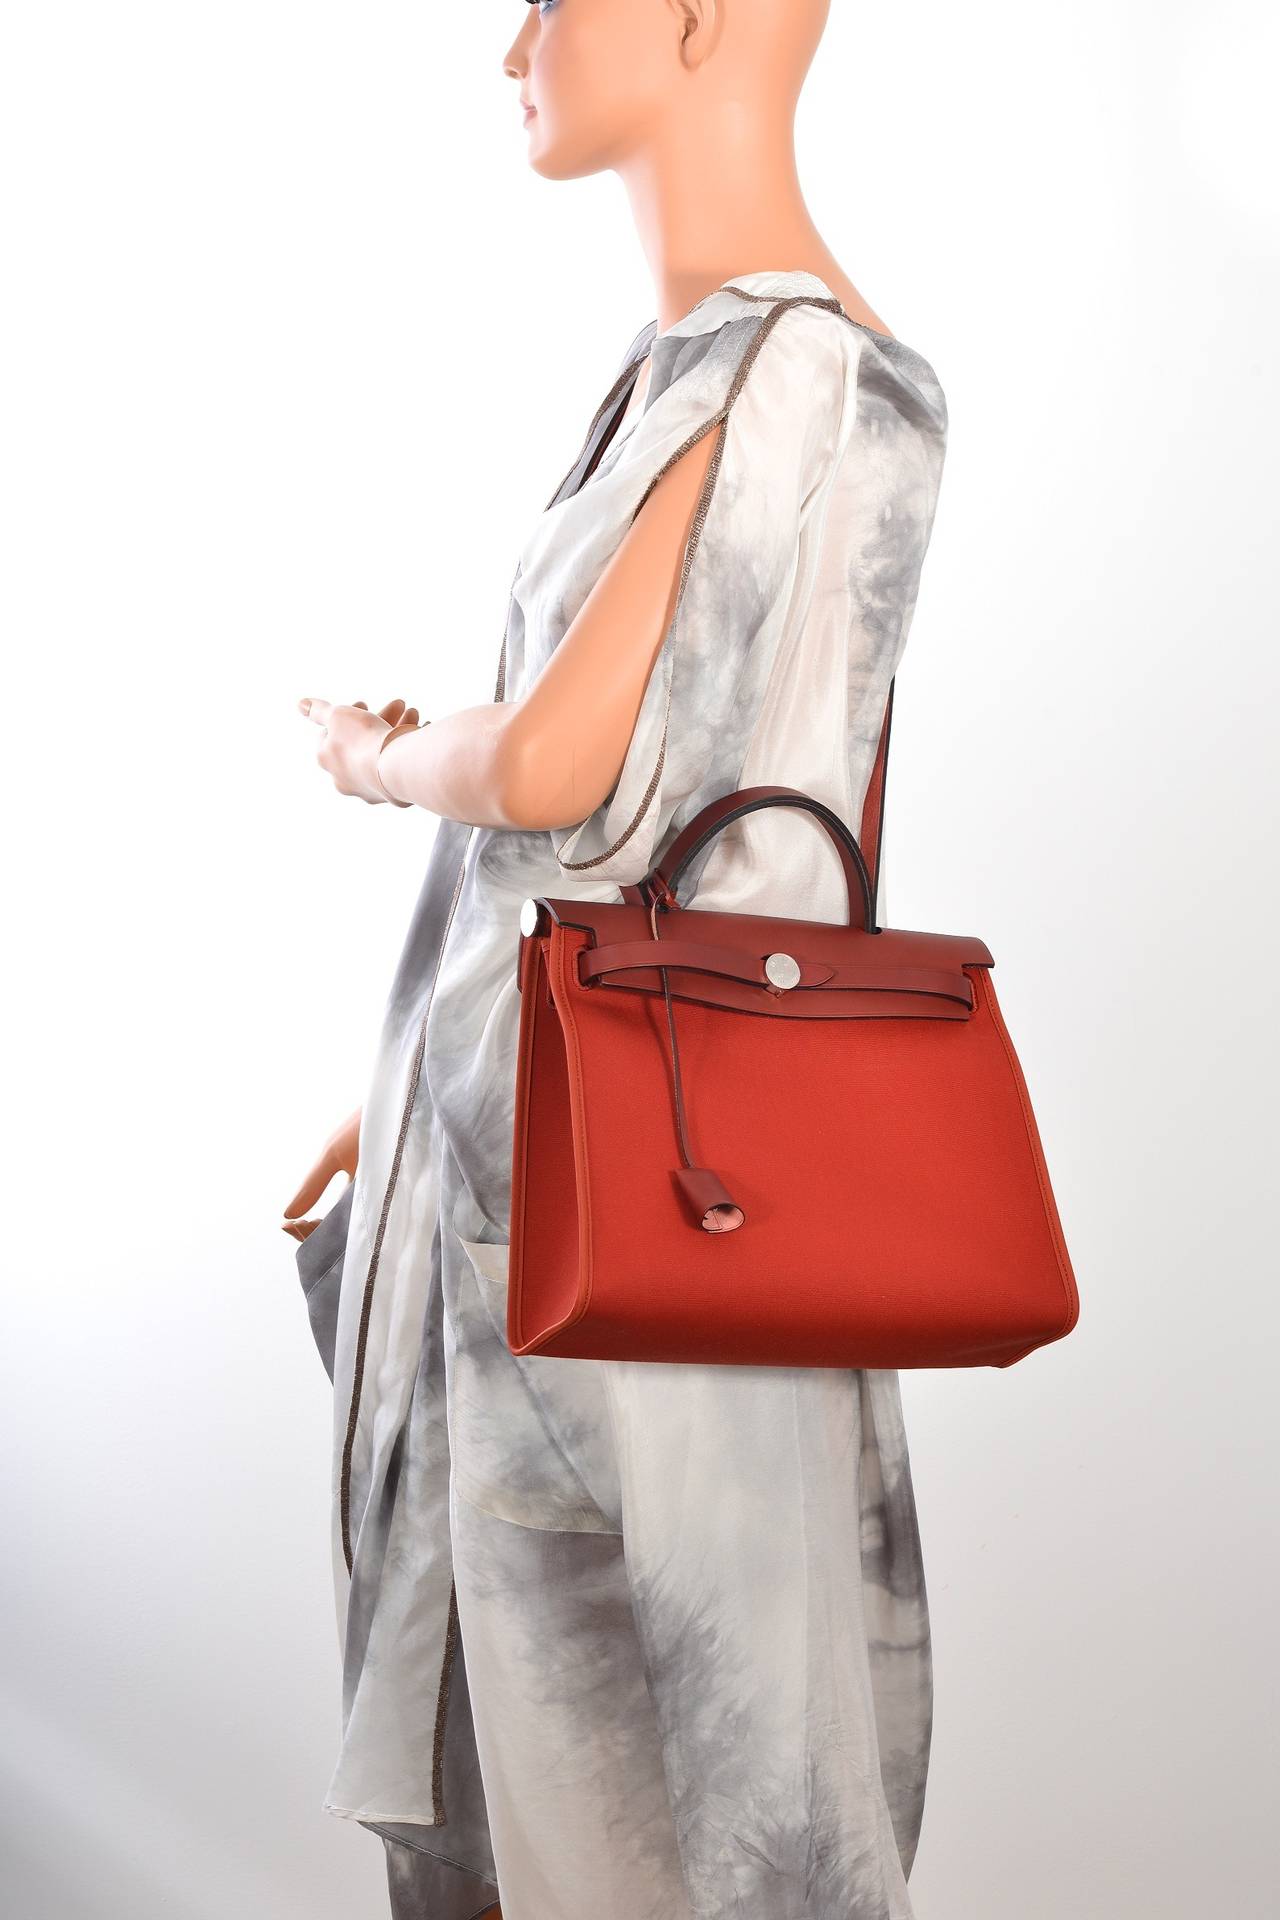 HERMES ZIP HERBAG ROUGE H CROSSBODY CANVAS & LEATHER JaneFinds 3